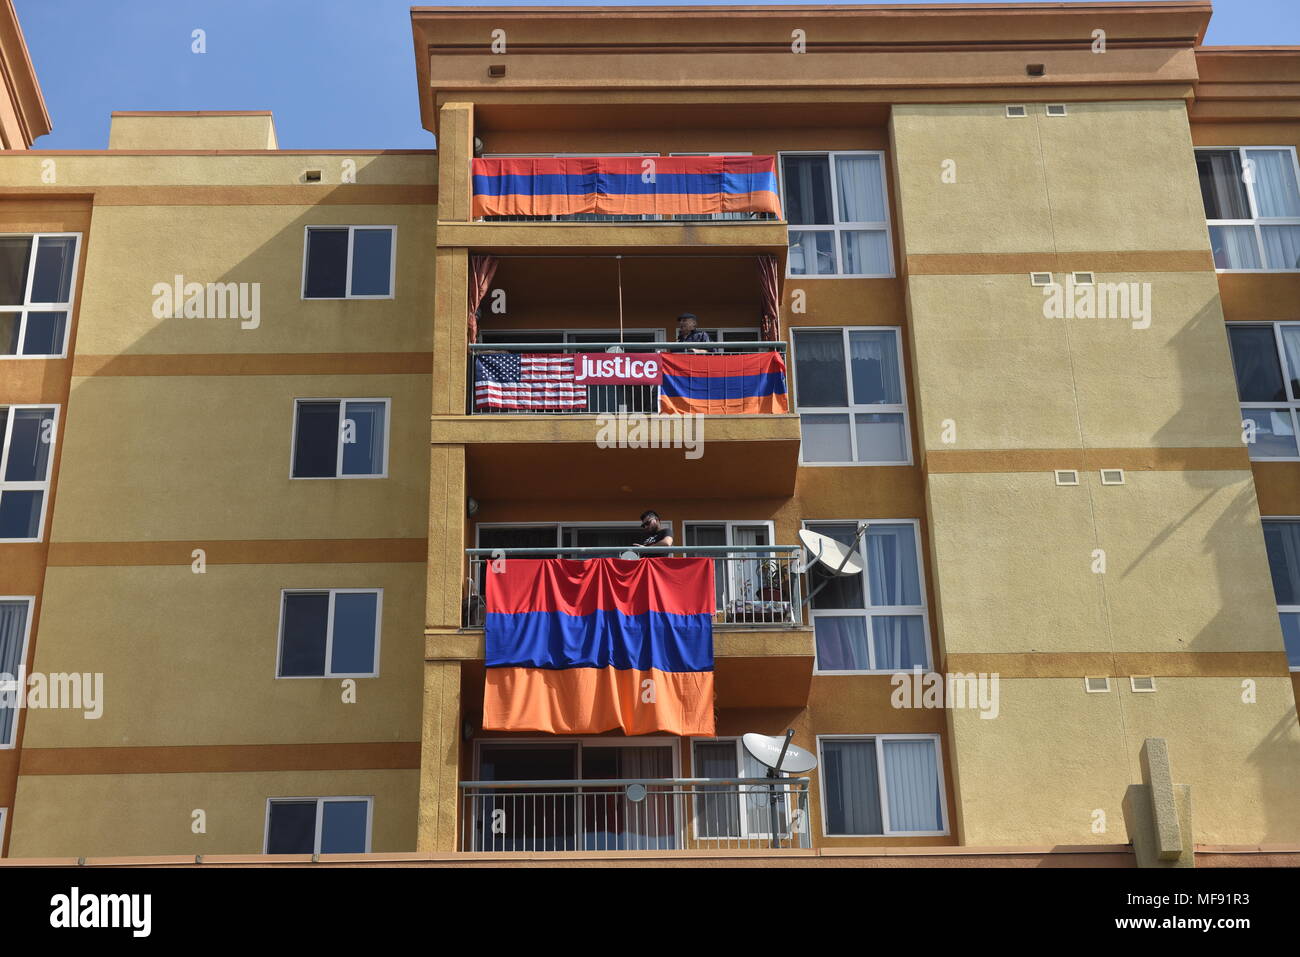 Los Angeles, USA. April 24, 2018 - LOS ANGELES — People hanging Armenian and American flags from their balconies as a sign of solidarity during the commemoration of the Armenian Genocide on April 24. Little Armenia is a community that is part of the Hollywood district of Los Angeles, California. Credit: Hayk Shalunts/Alamy Live News Stock Photo